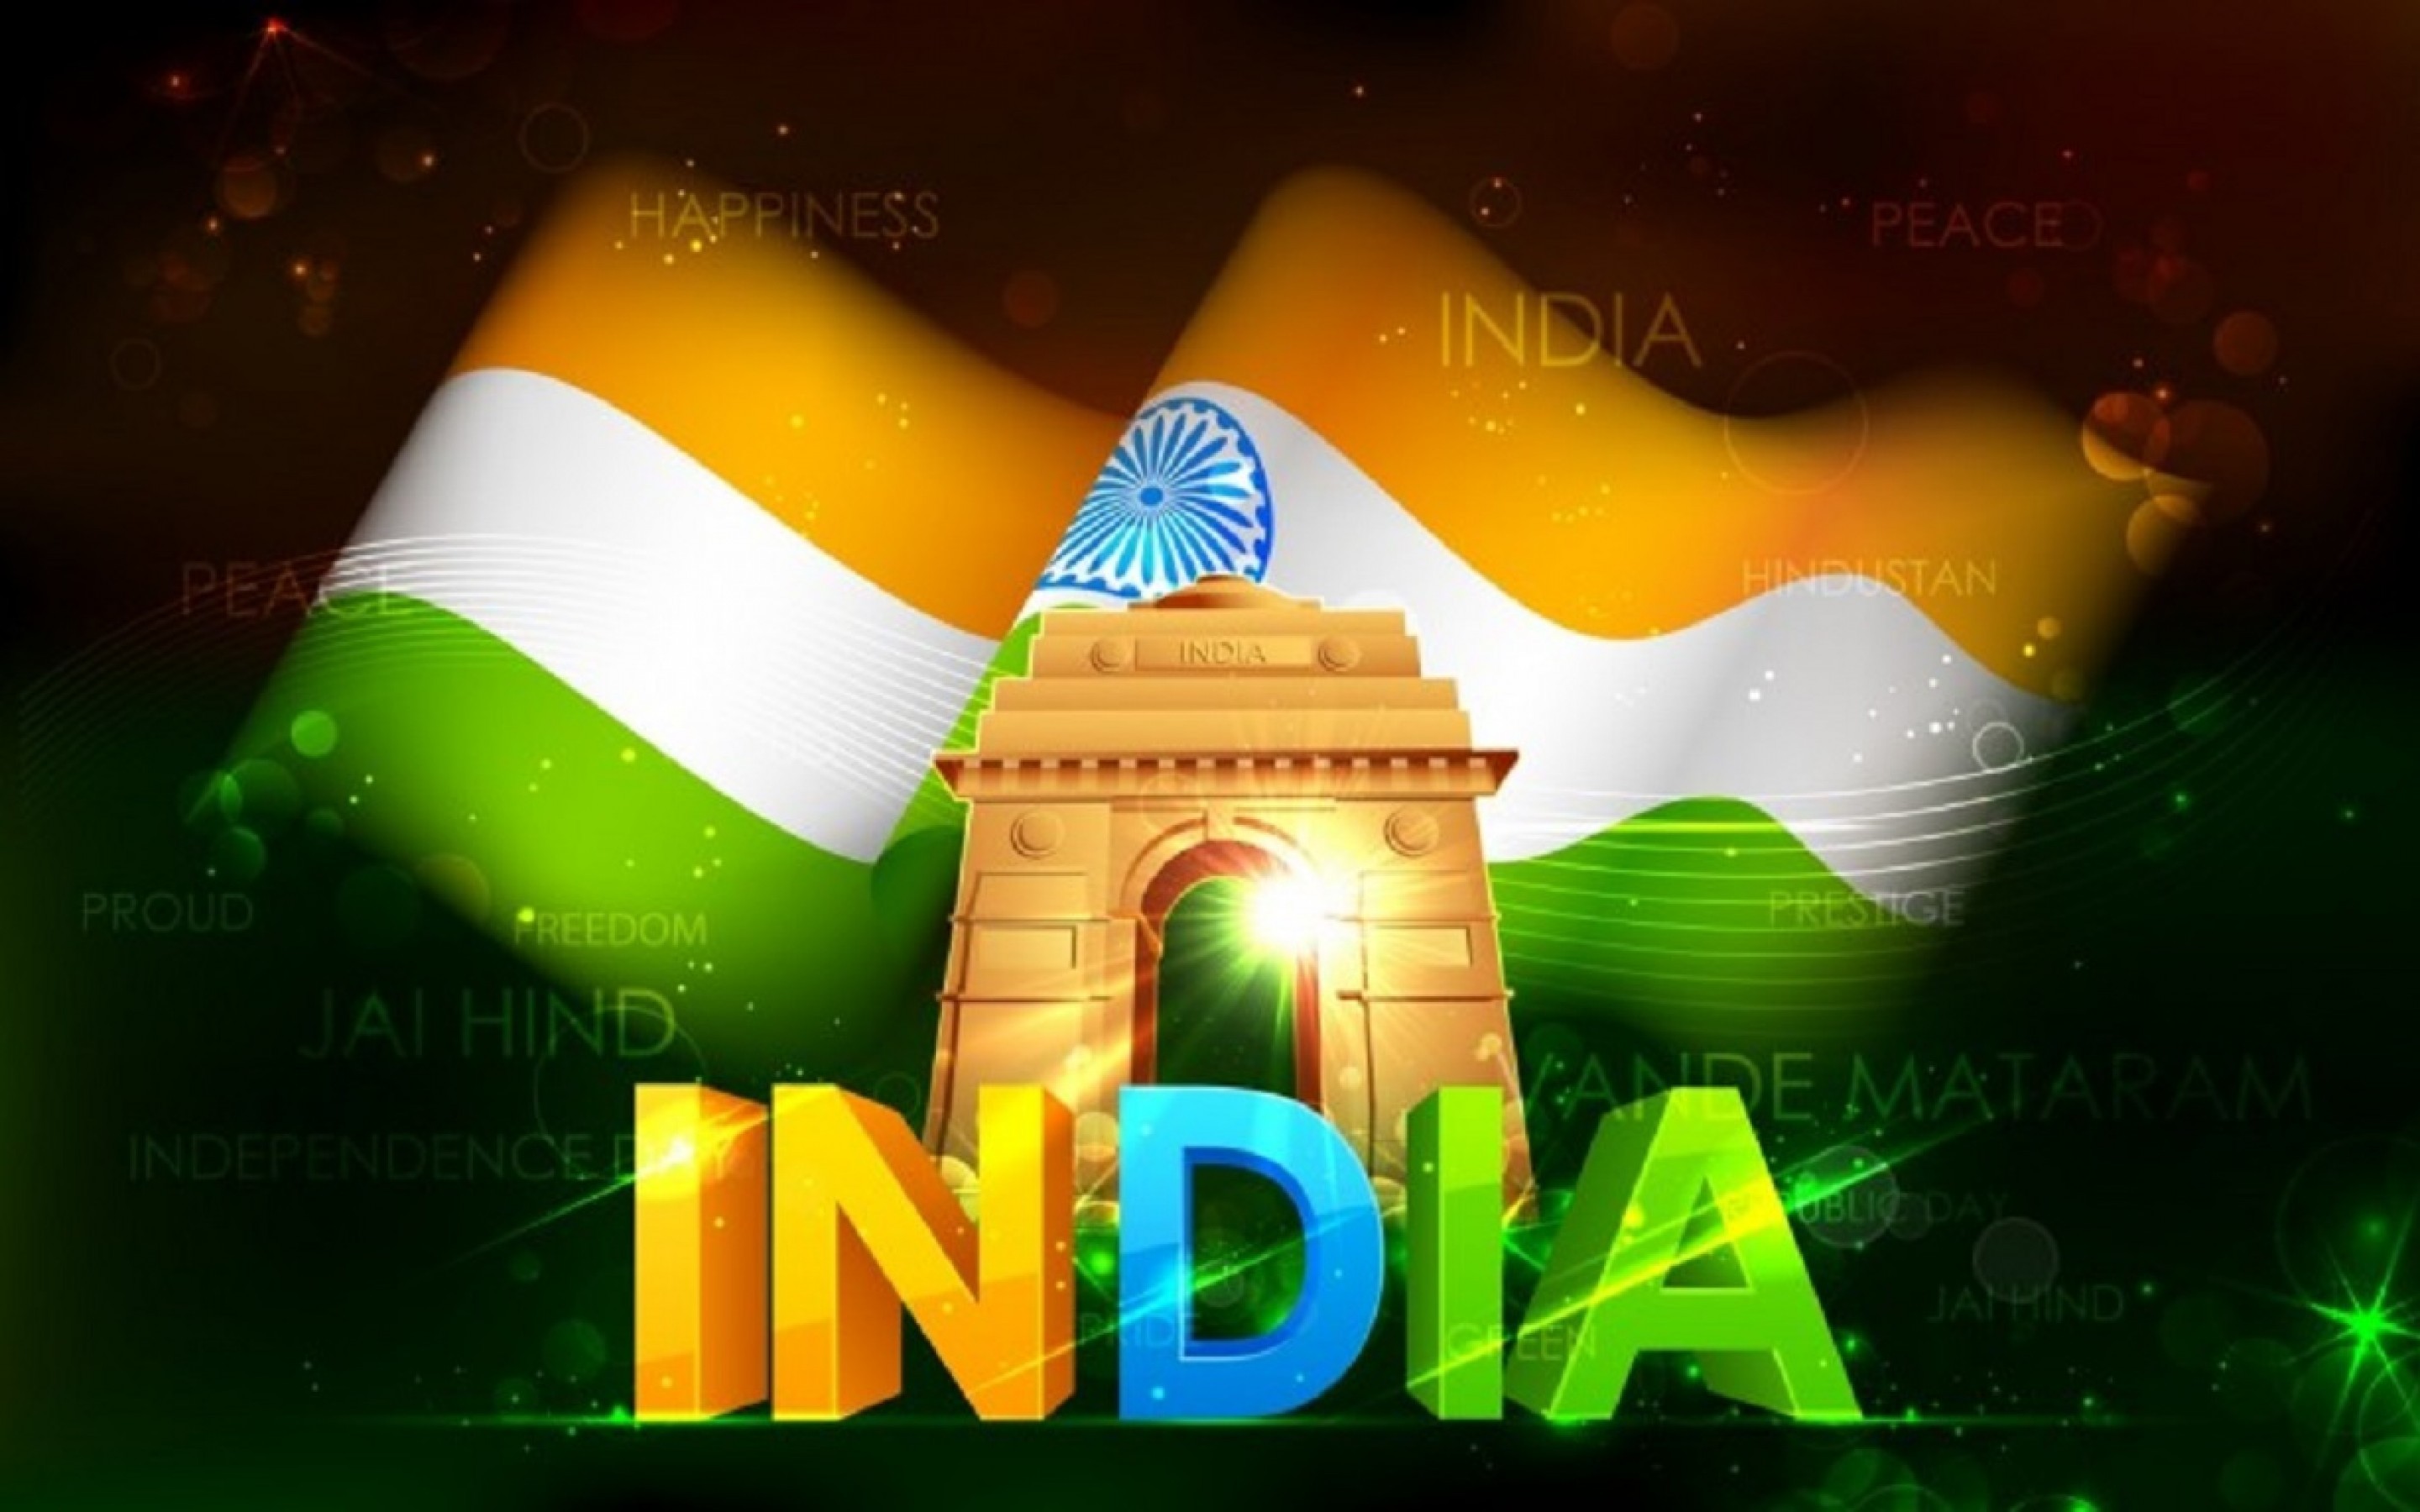 26 Jan India Republic Day HD Images, Wallpapers - Free Download